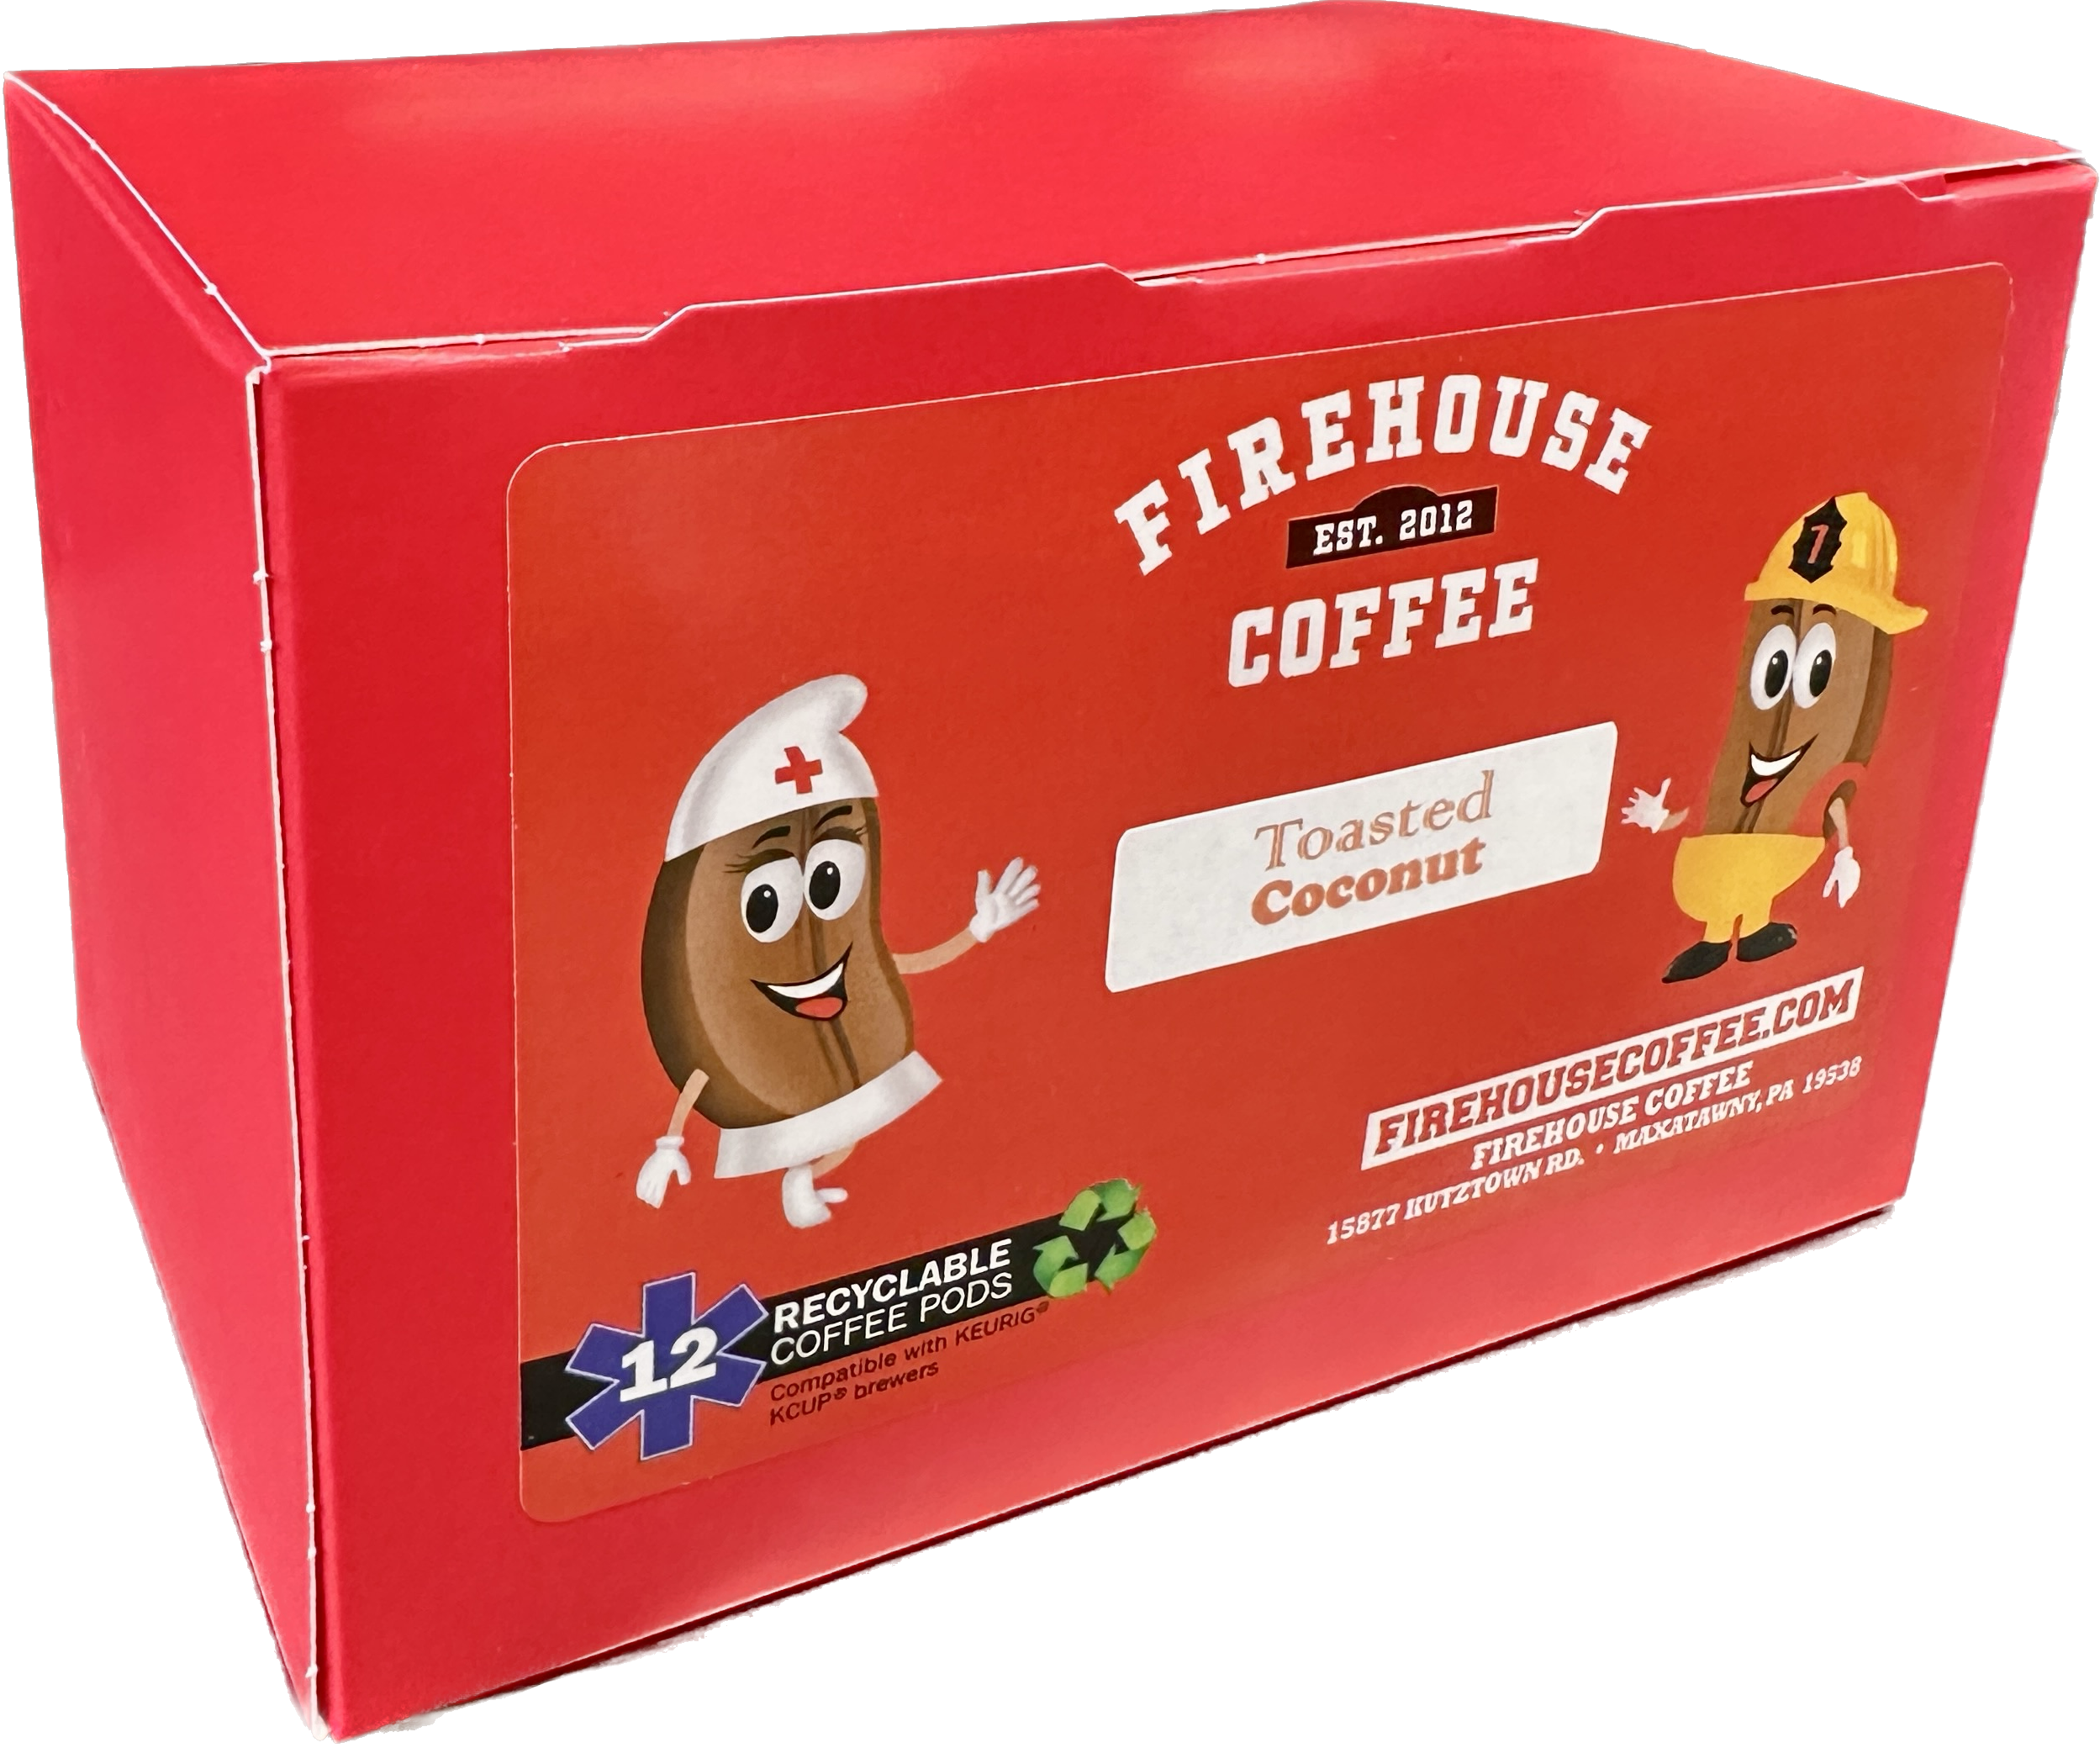 Firehouse Toasted Coconut Flavored Coffee packed in a single serve KCup